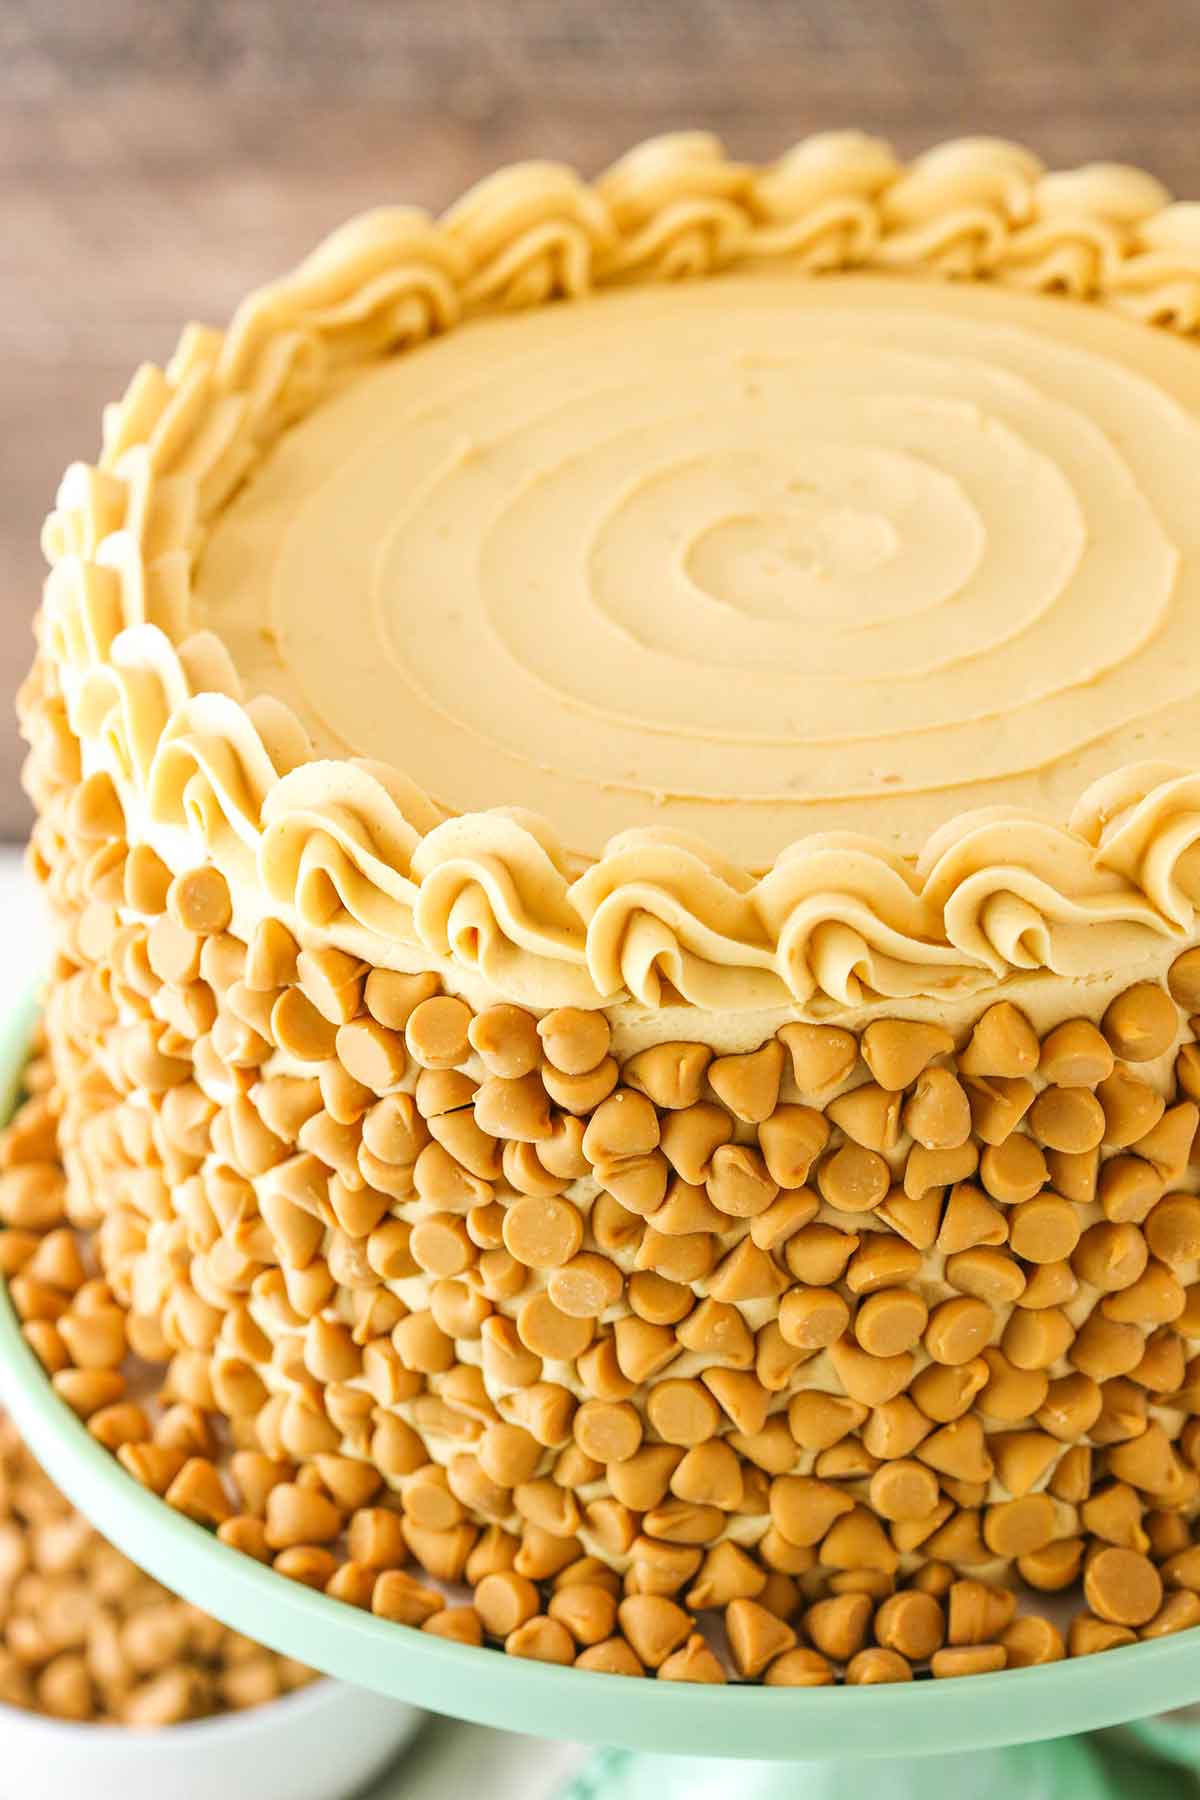 Side view of a full Ultimate Butterscotch Cake on a green cake stand